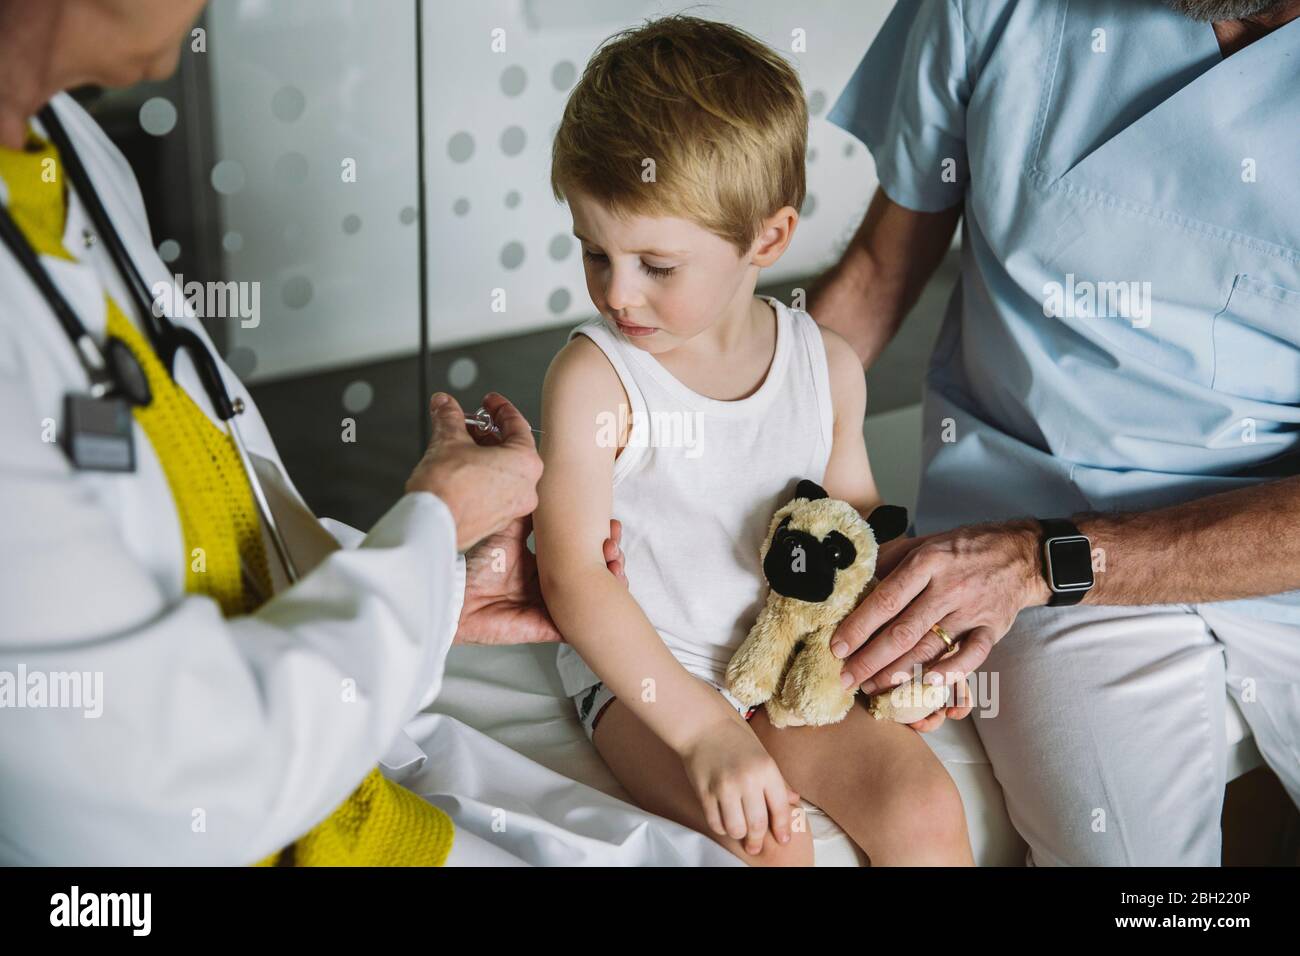 Pediatrist injecting vaccine into arm of toddler Stock Photo